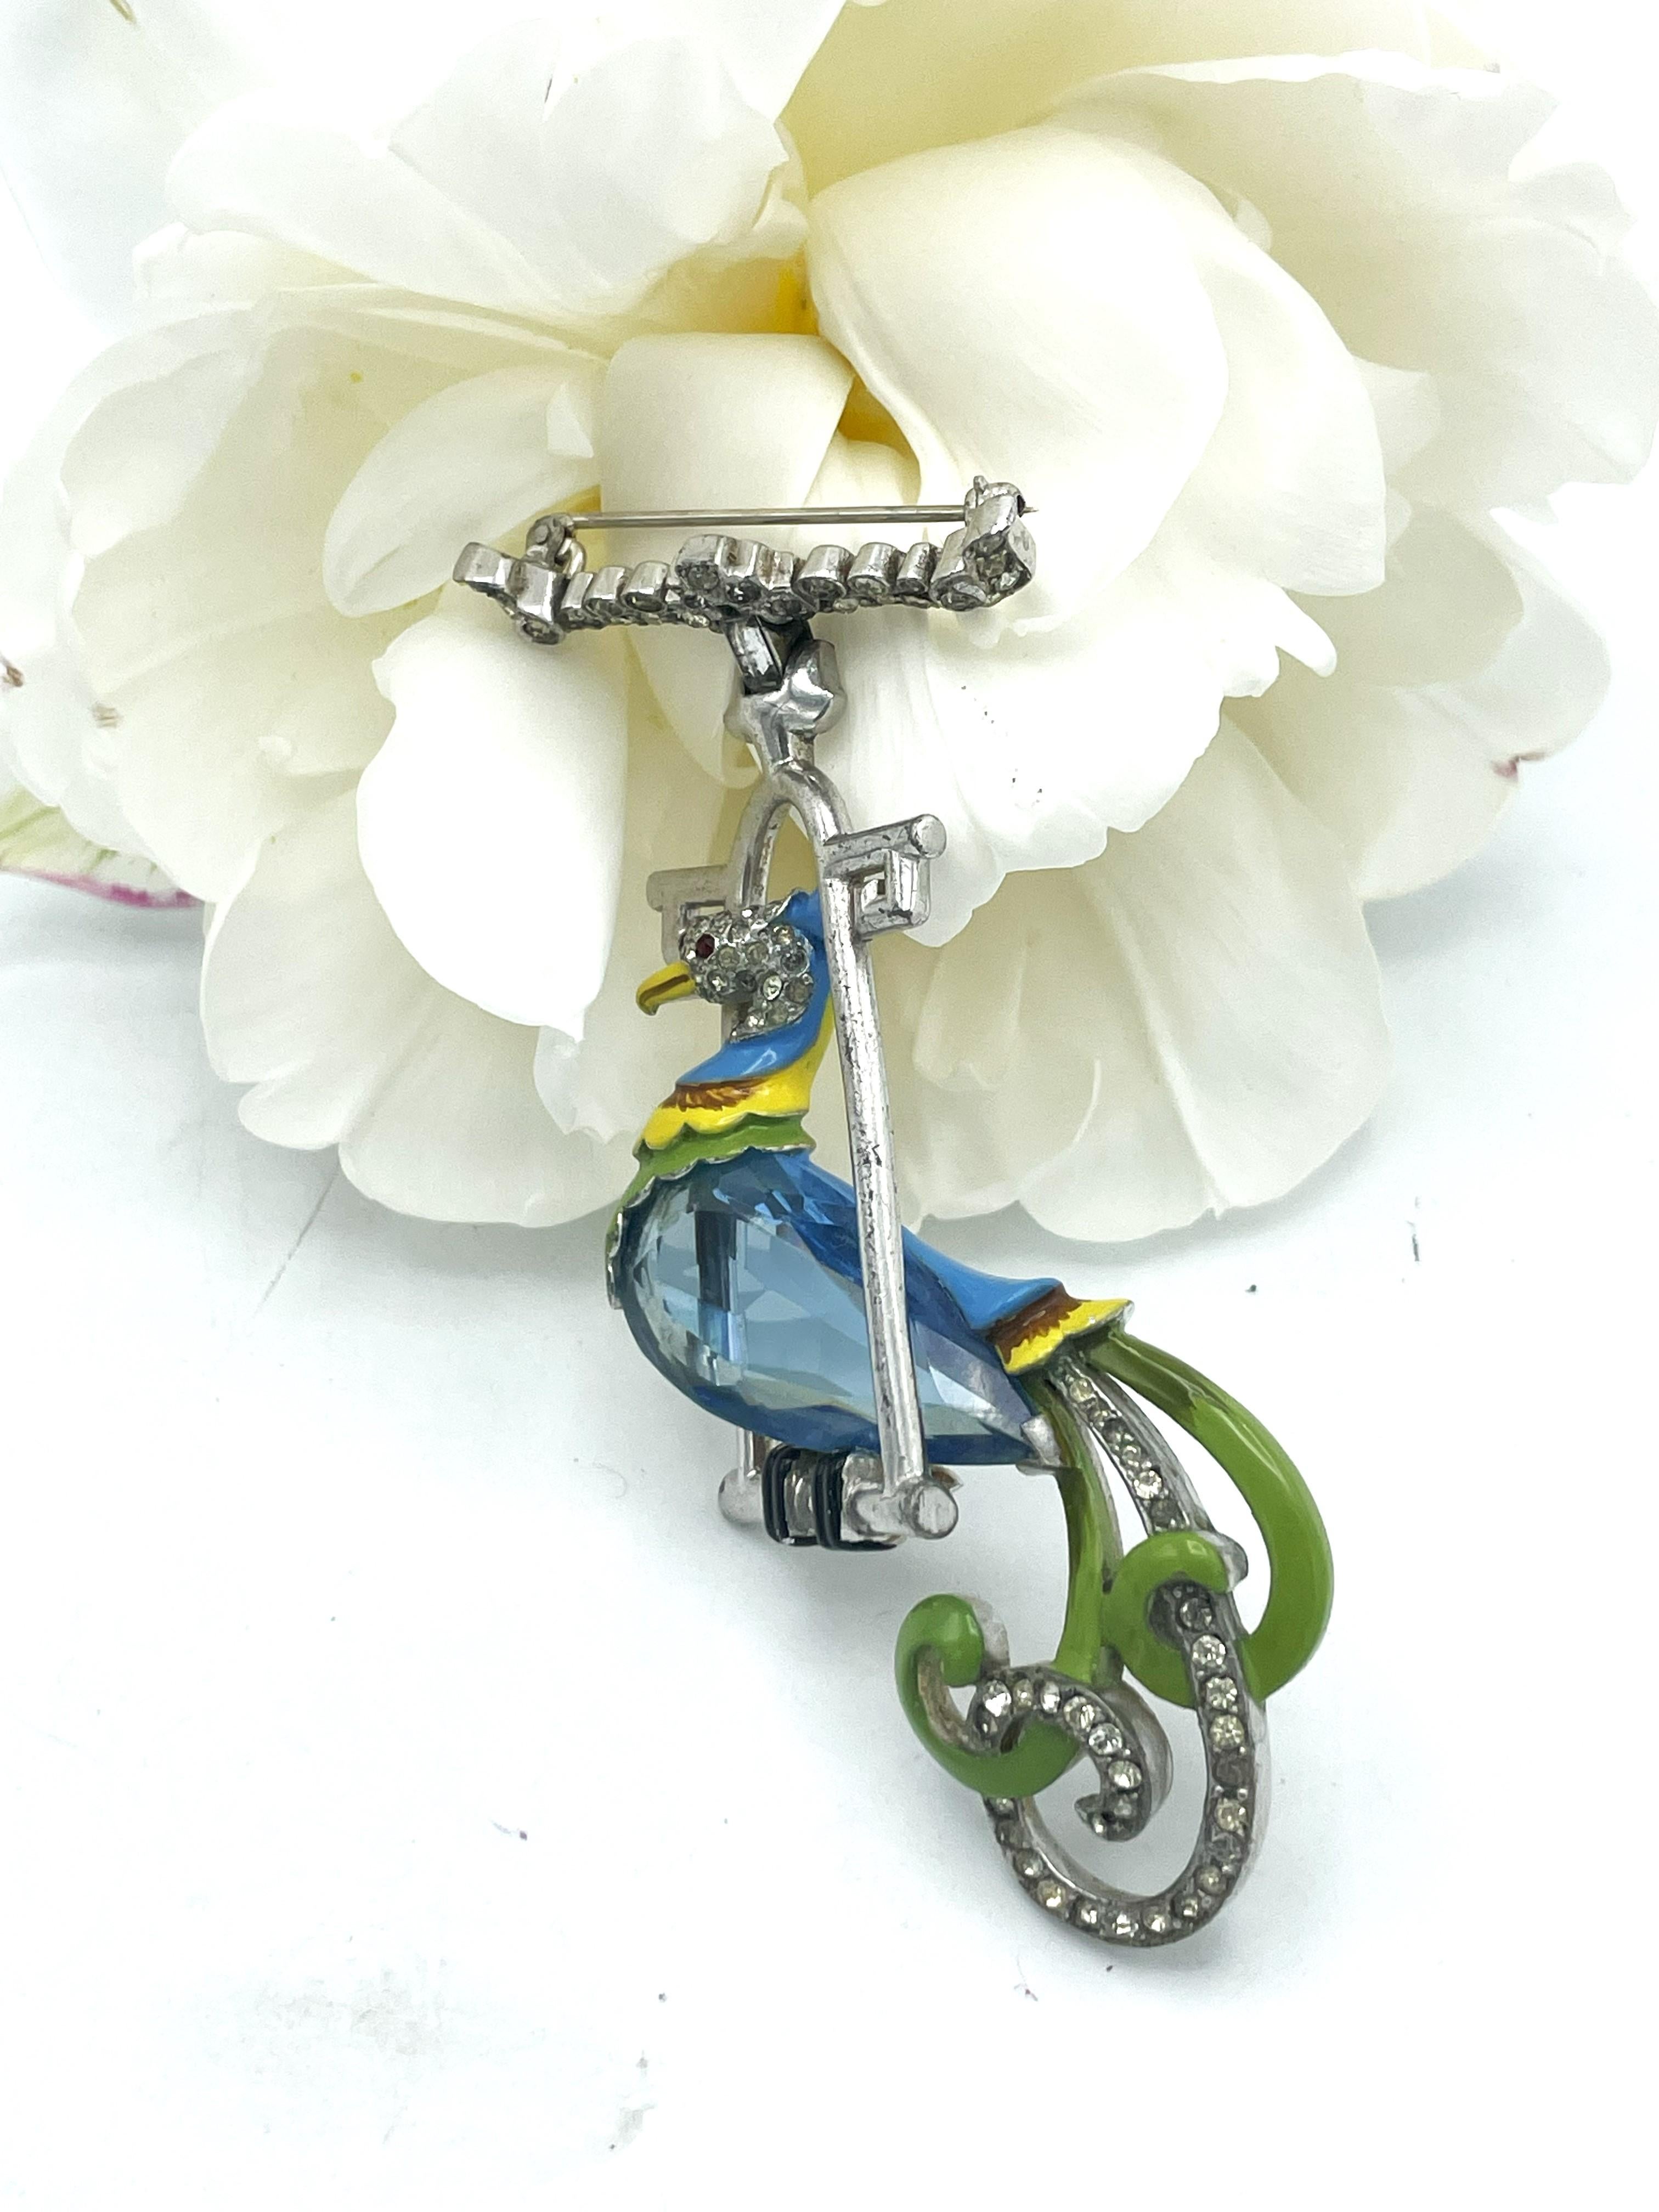 An  aqua bird of paradis on a swing are pendant from the pave crown wich hold die brooch.

Size: 
Height 9 cm
Width   5 cm
Depth  1 cm

Features
- Bird of Paradis sitting on a swing by Mazer unsigned 
- Designed in the 1942s USA
- Polished large